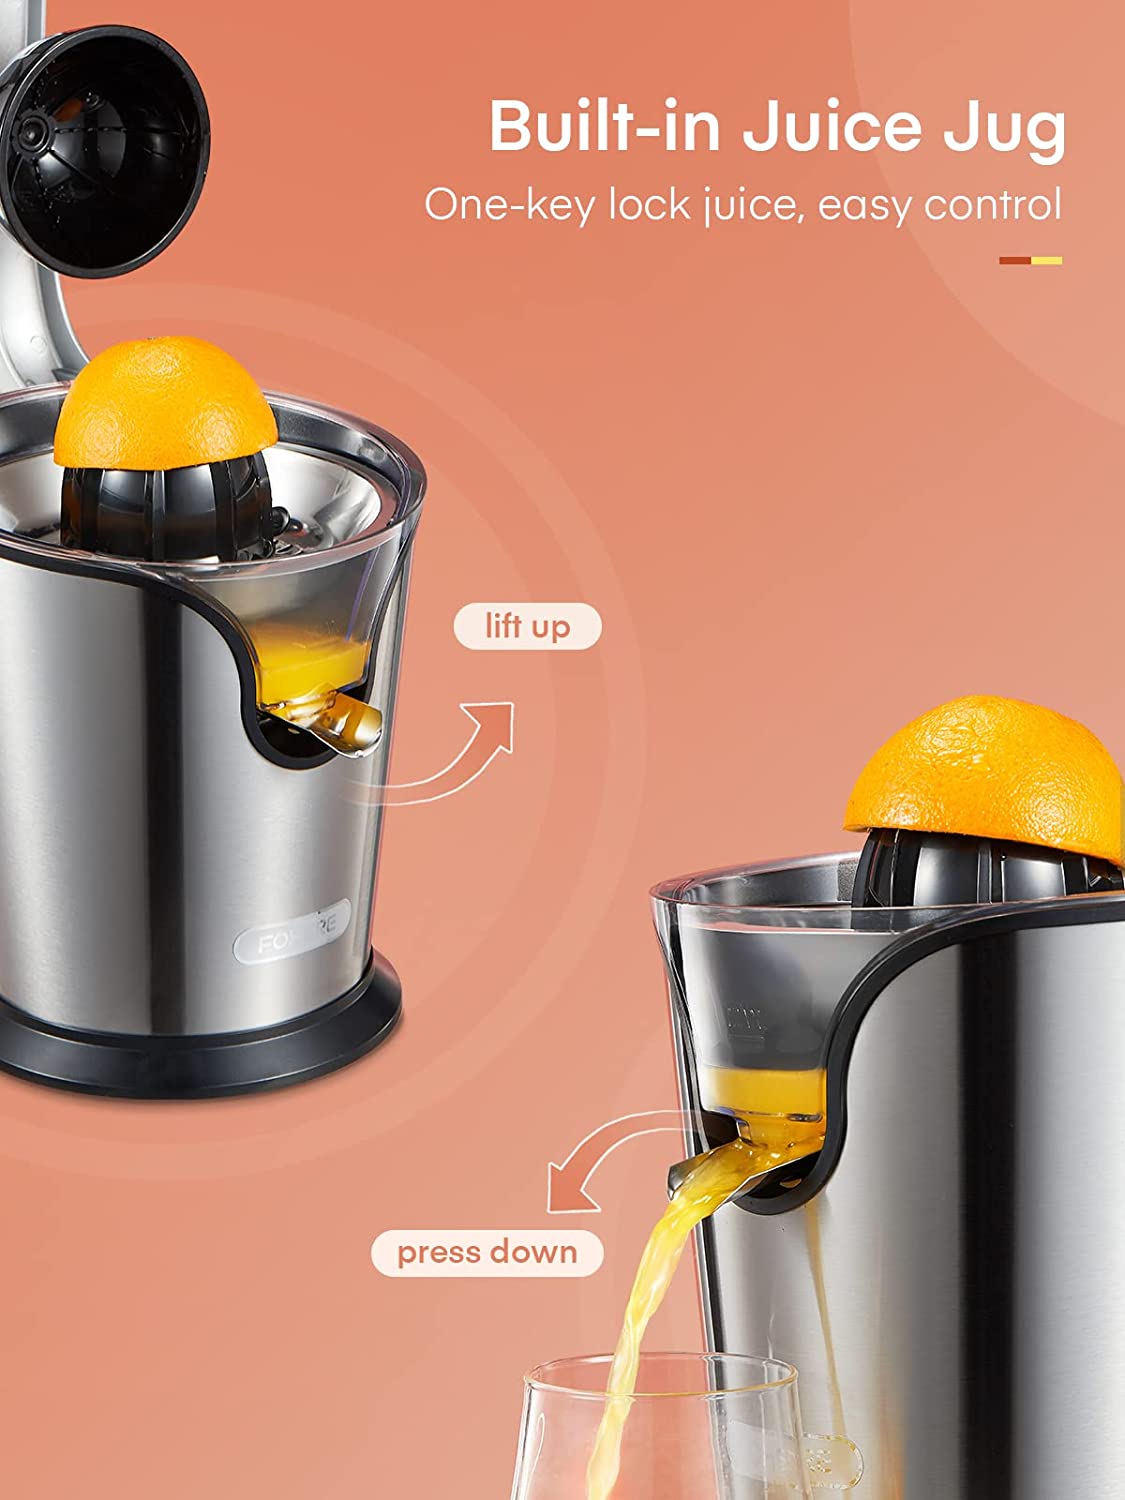 built in juice jug, FOHERE Citrus Juicer Electric Orange Juicer Squeezer with Humanized Handle, Powerful 160W Silent Motor Stainless Steel BPA-Free, Two Size Cones for Grapefruits, Orange and Lemon, Silver